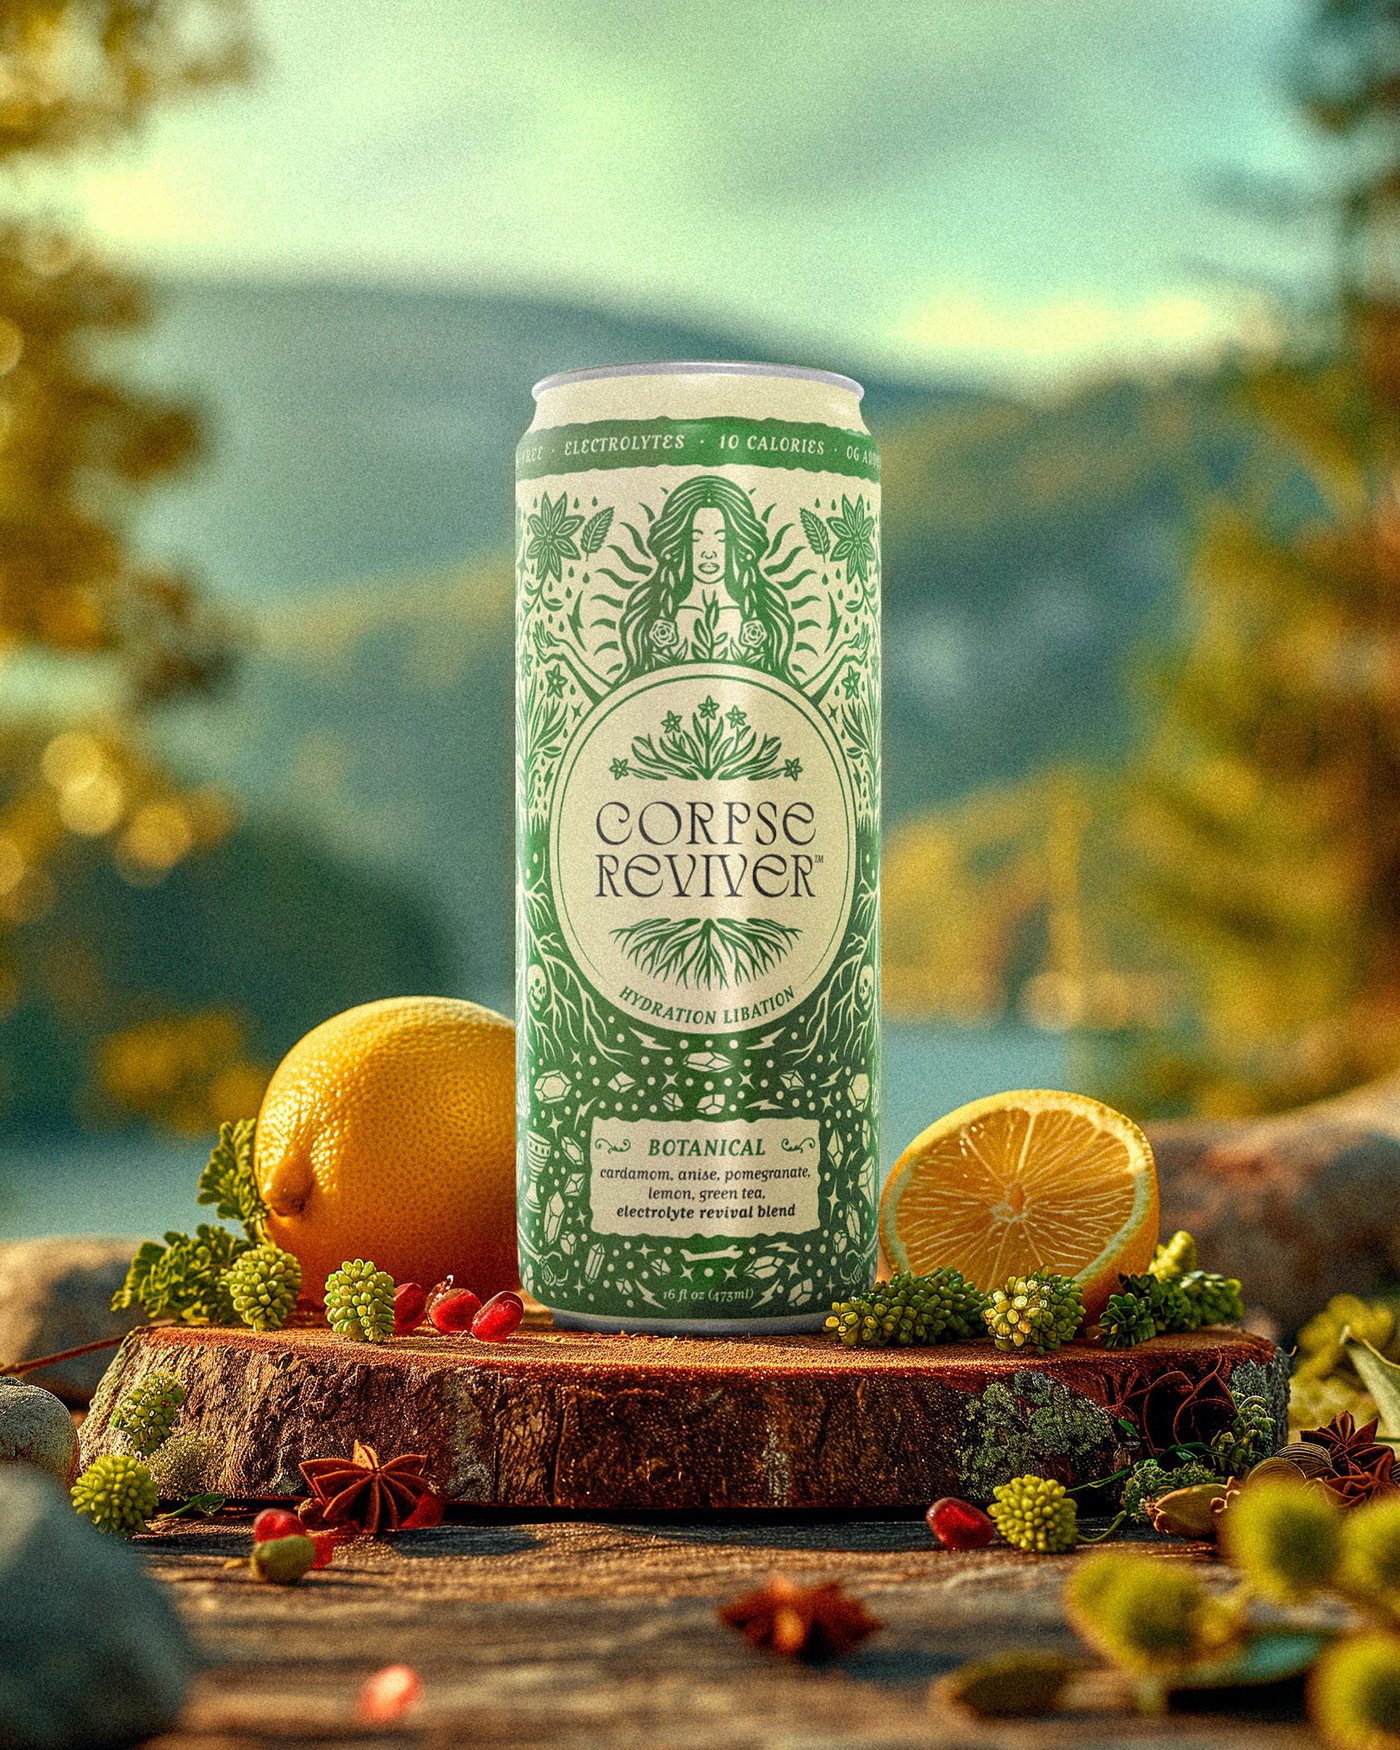 Packaging and Labeling packaging design Can Label Design label design Vintage Branding Can Design Can Label sparkling water vintage illustration label illustration